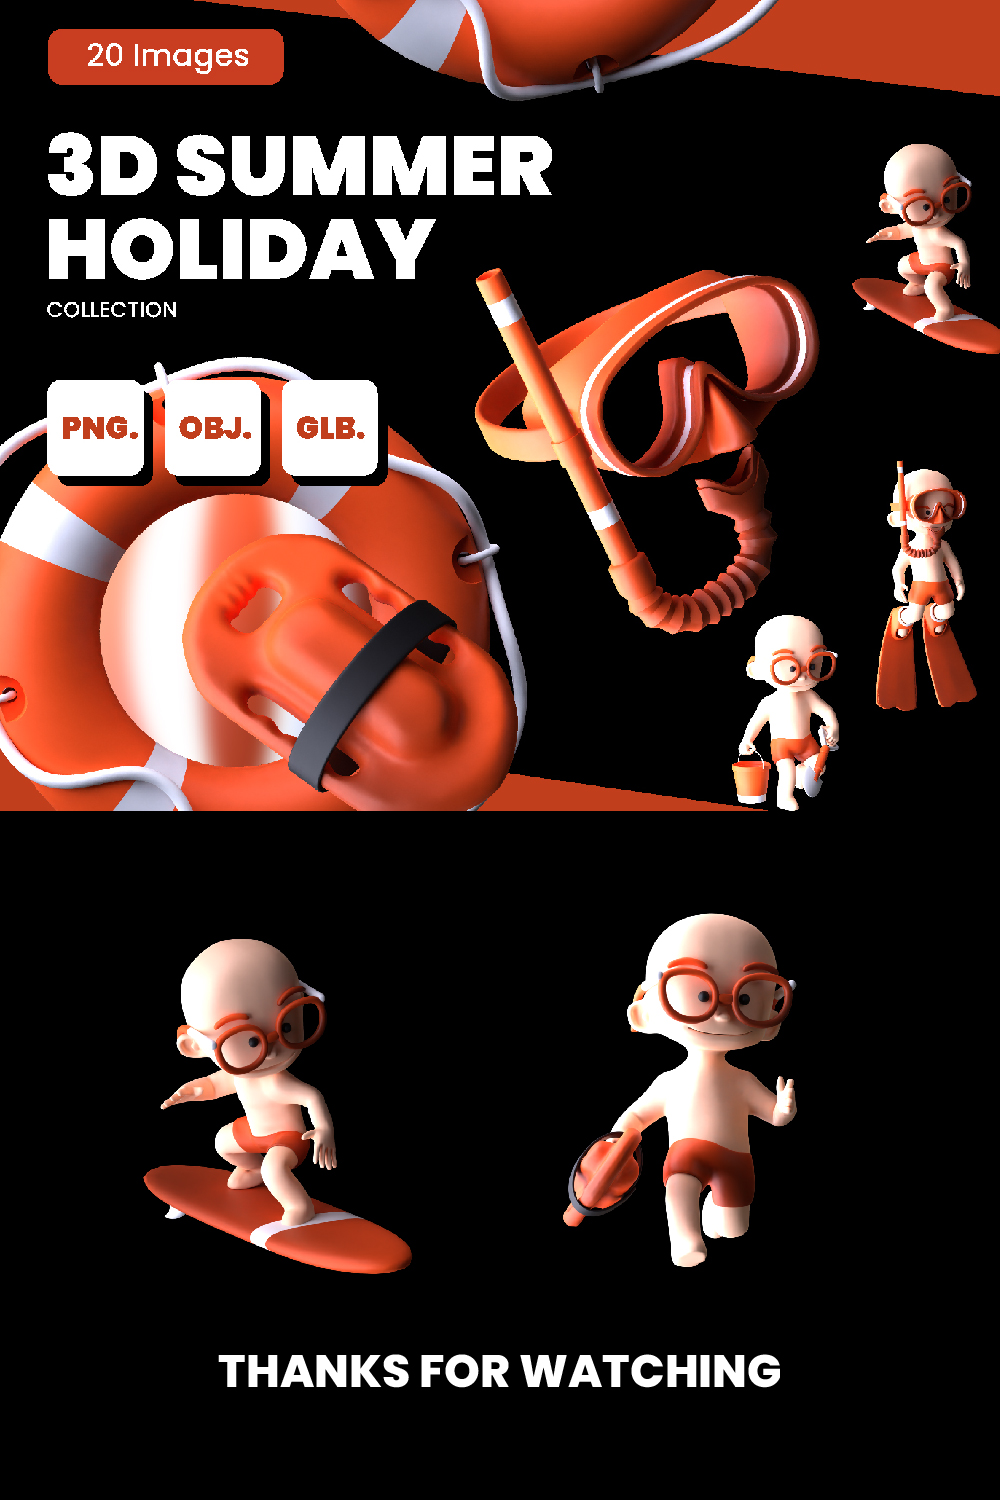 3d summer holiday pinterest preview image.